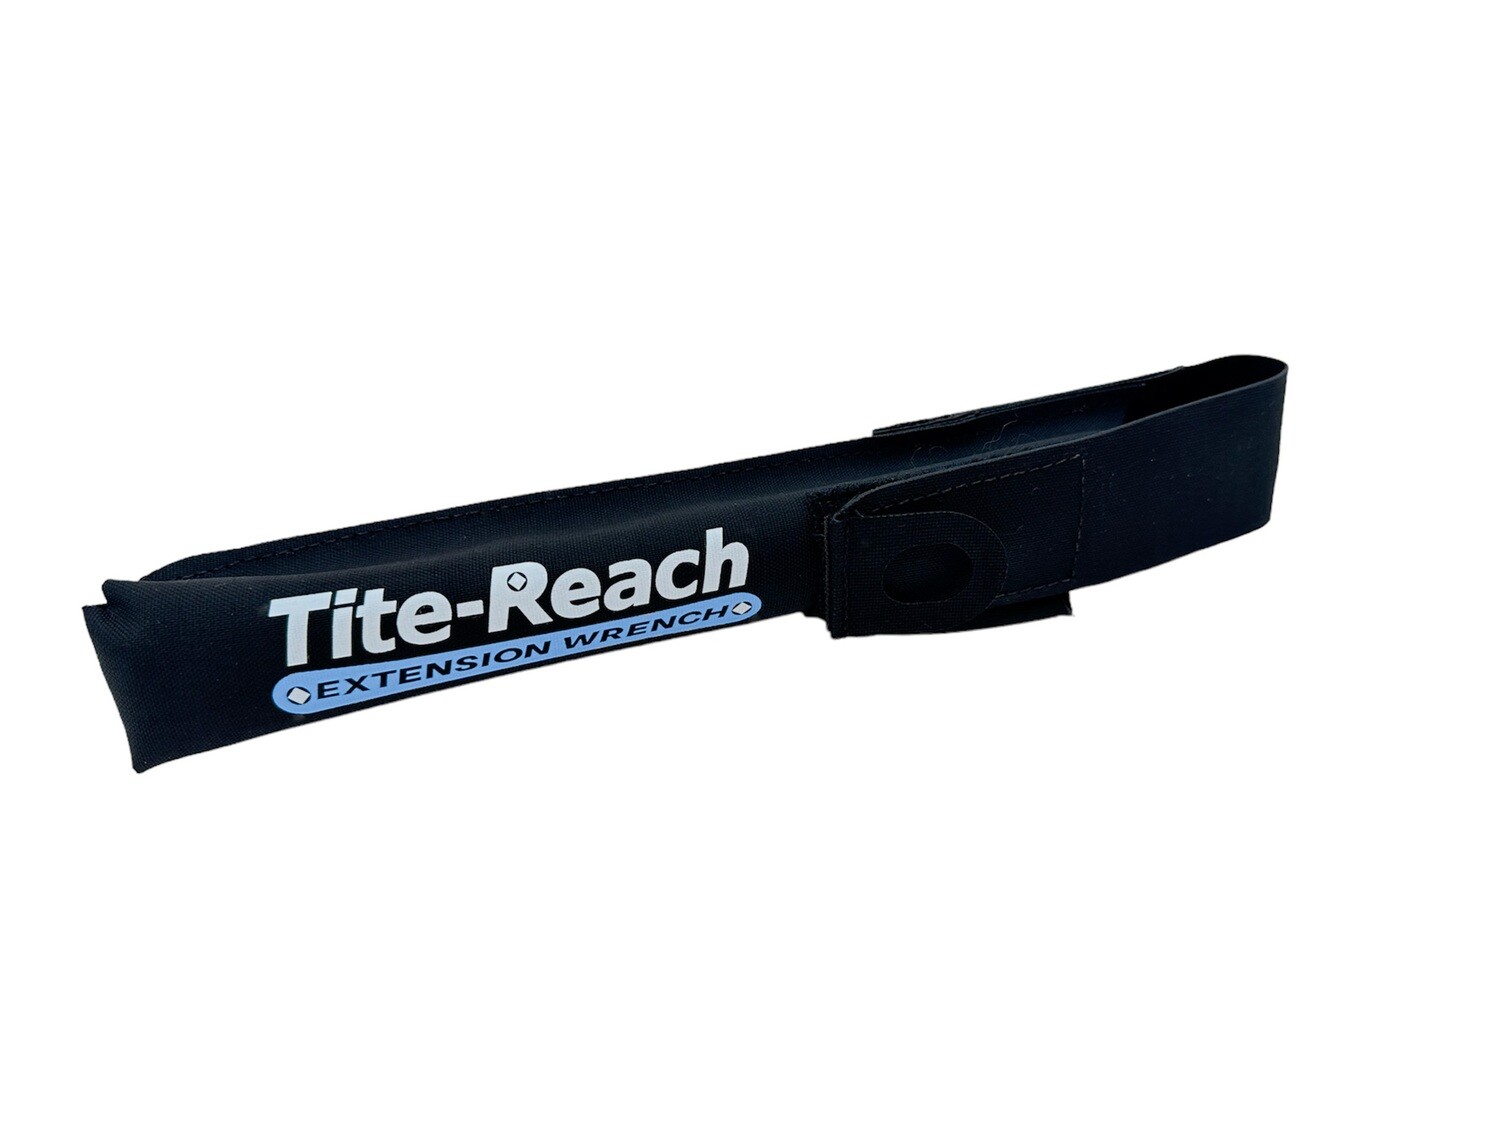 Tite-Reach™ Extensions Wrench, Professional 1/4 inch, LaserLock™